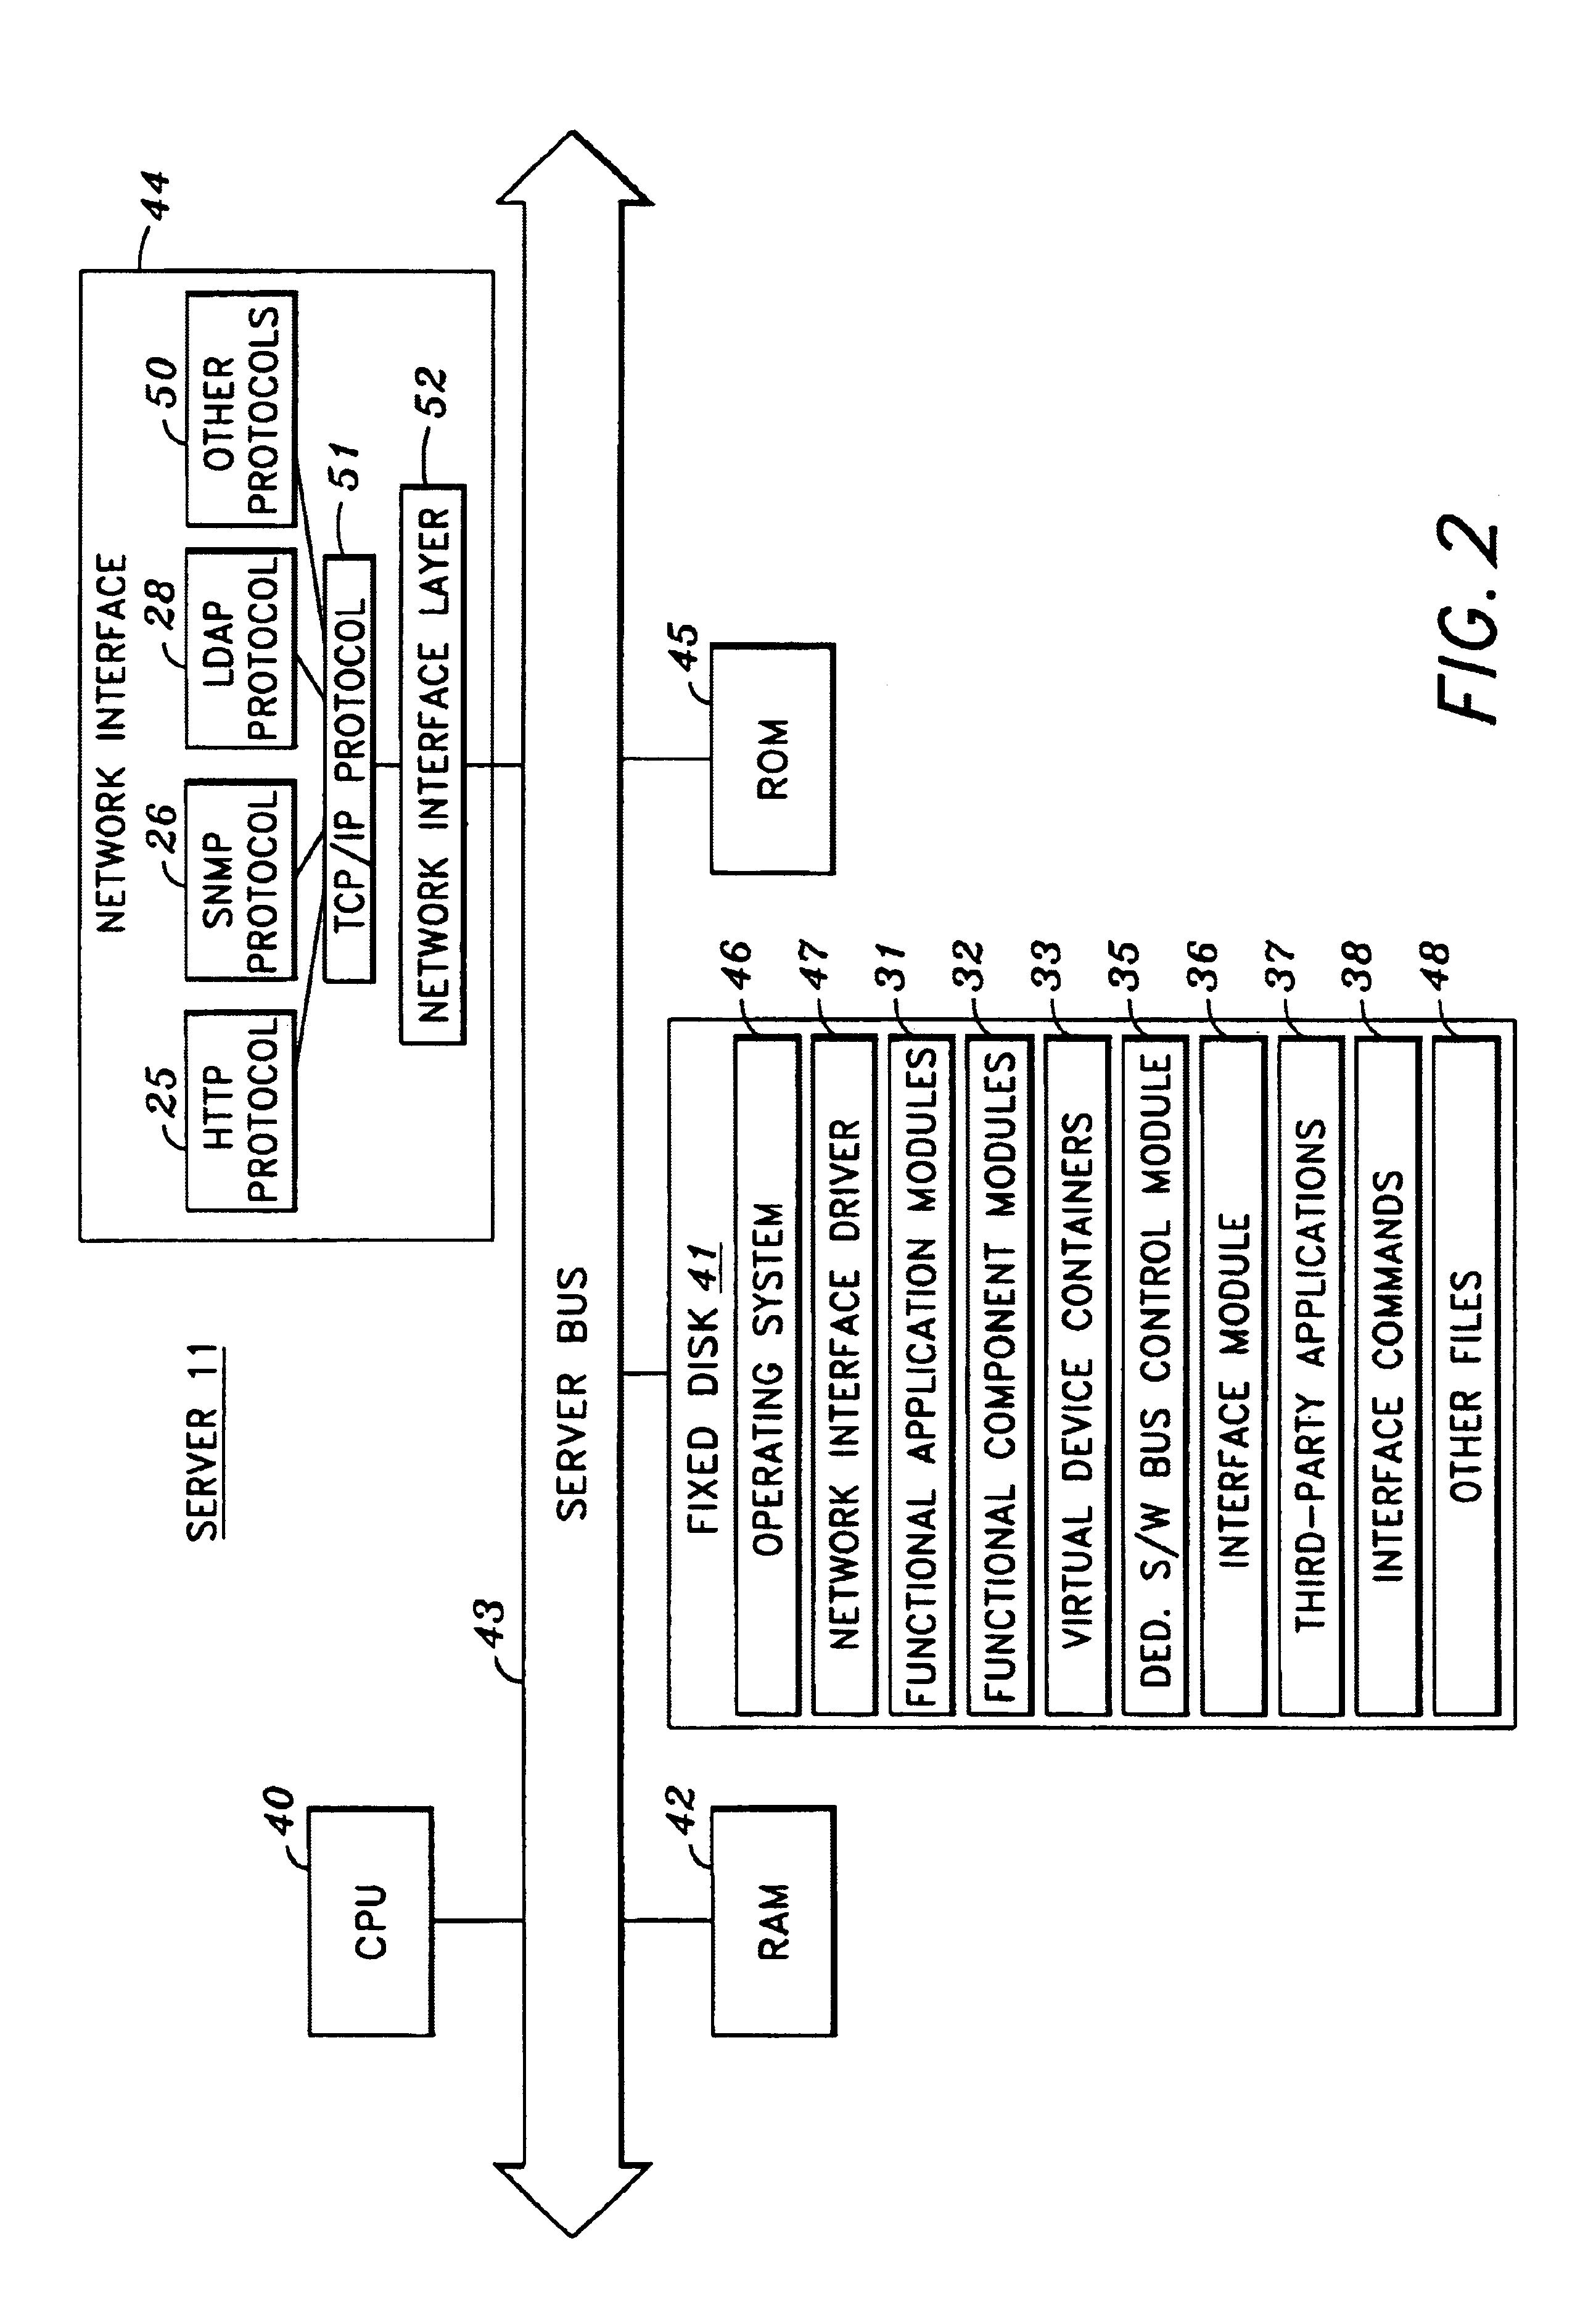 Command interface to object-based architecture of software components for extending functional and communicational capabilities of network devices